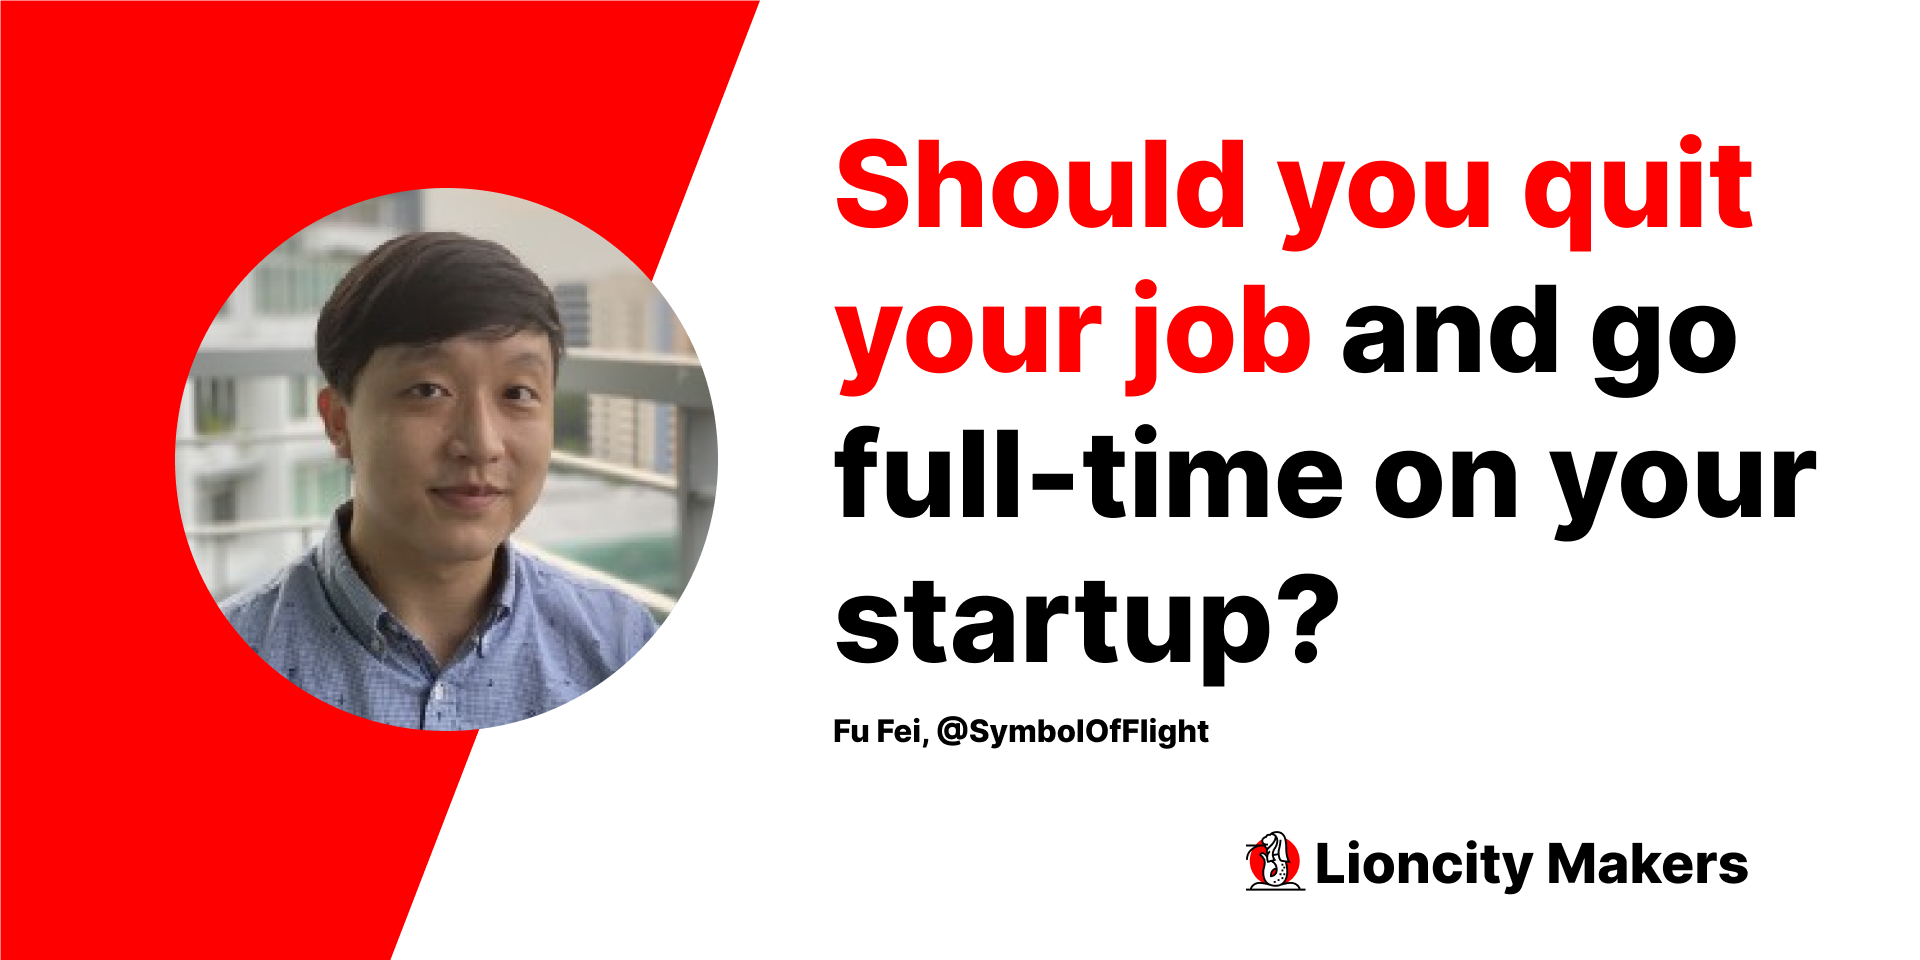  I chose to work on my startup on nights and weekends rather than quit my full-time job.